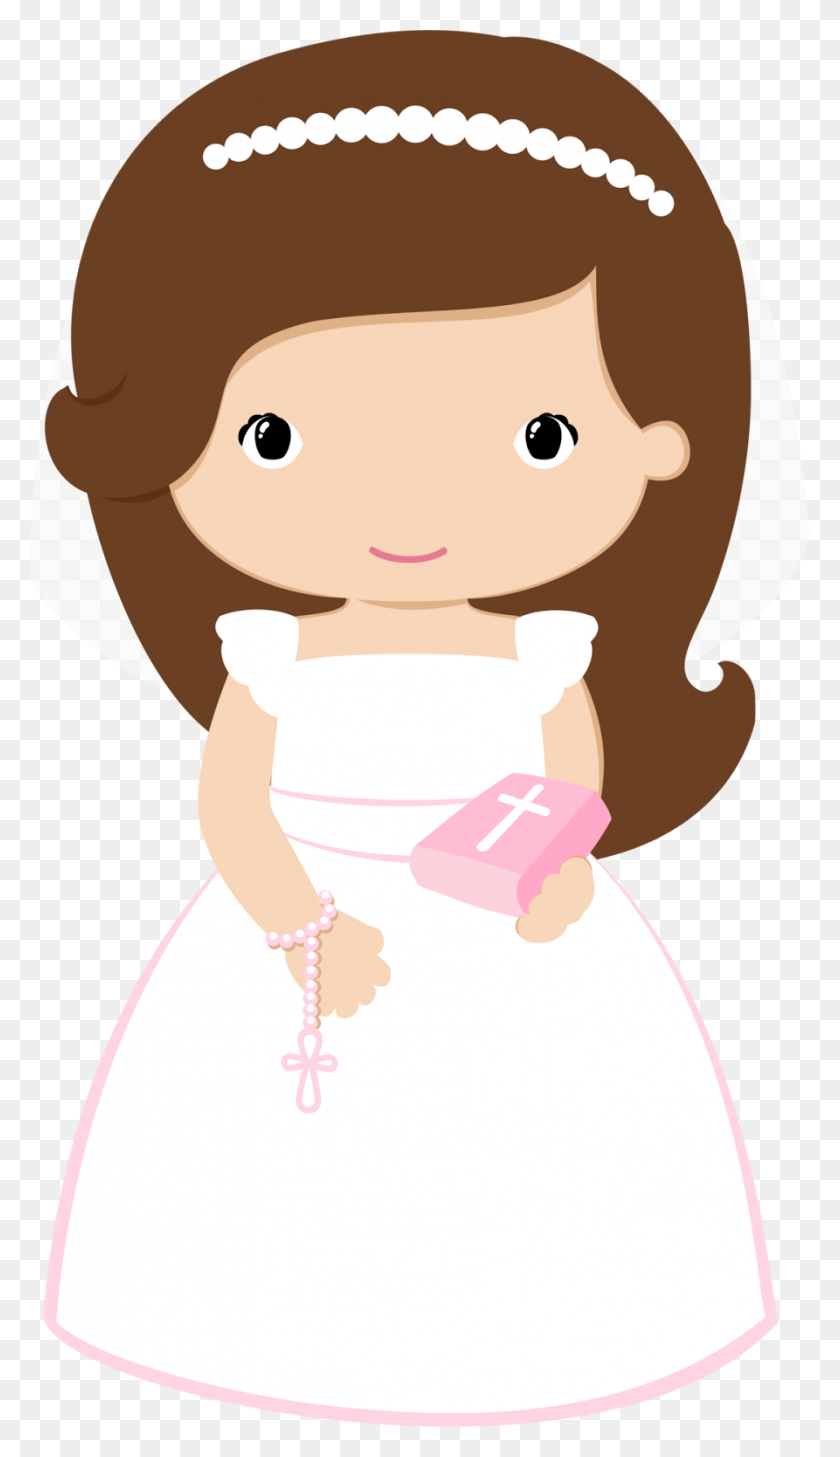 893x1600 Girls In Pink For Their First Communion First Communion - Communion Sunday Clip Art